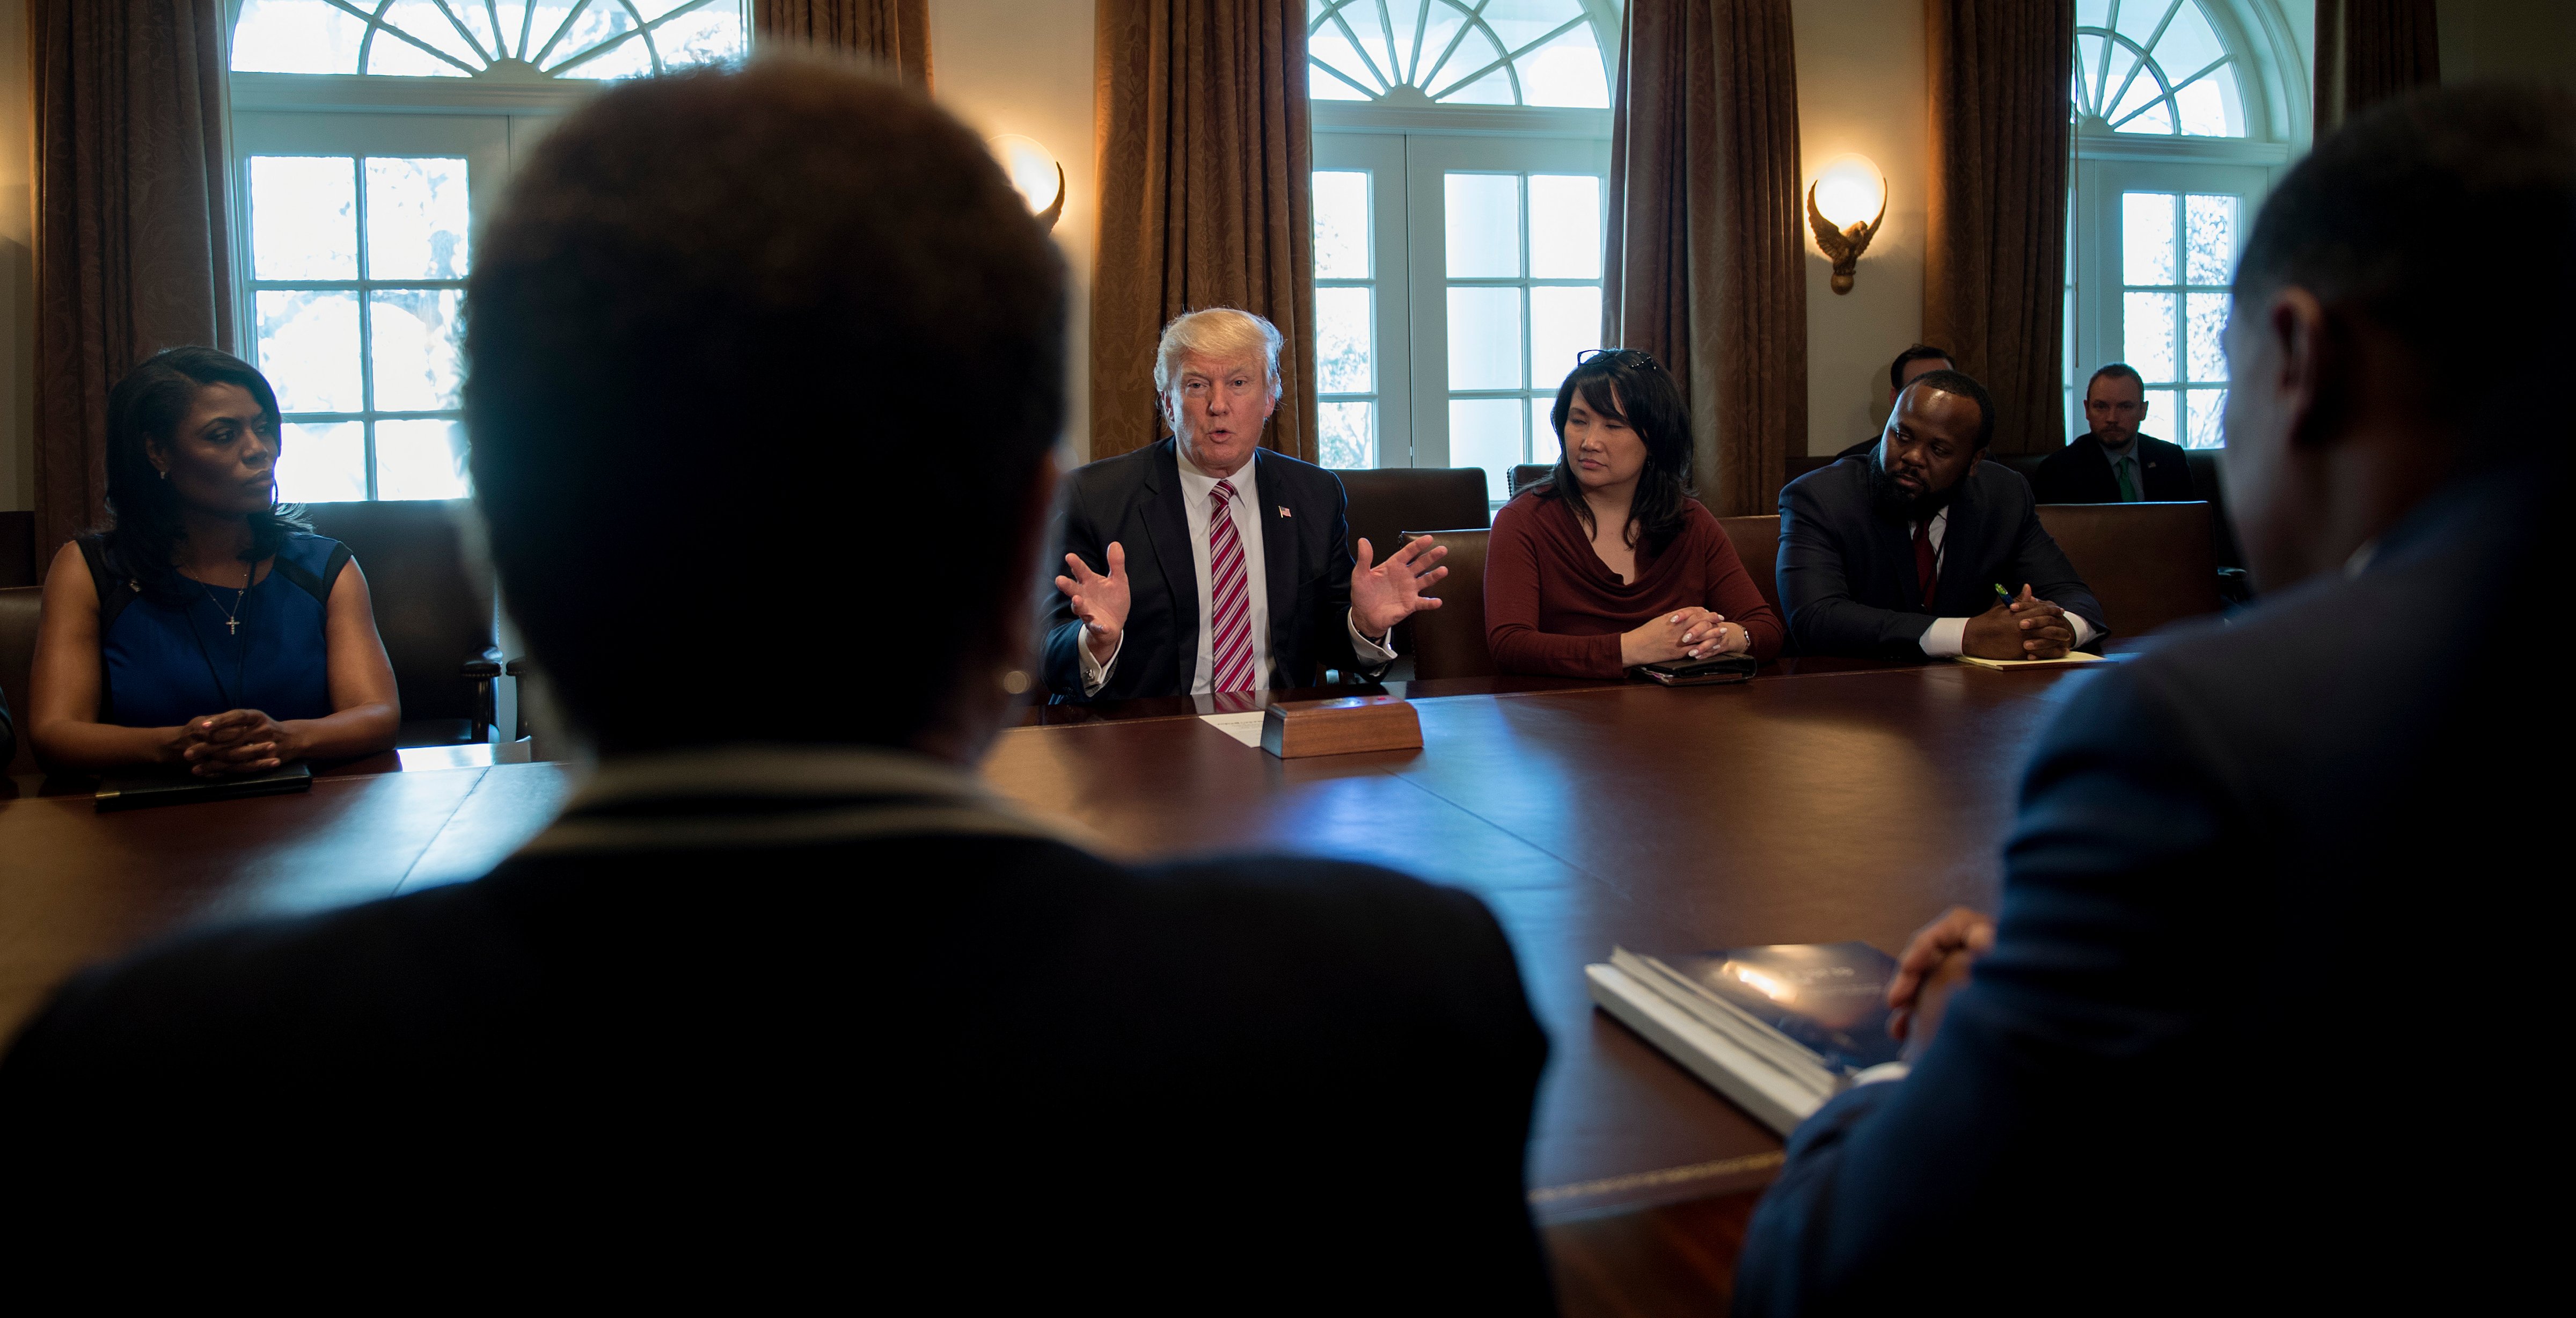 US President Donald Trump (C) meets with the Congressional Black Caucus Executive Committee at the White House in Washington, DC, March 22, 2017 (JIM WATSON&mdash;AFP/Getty Images)